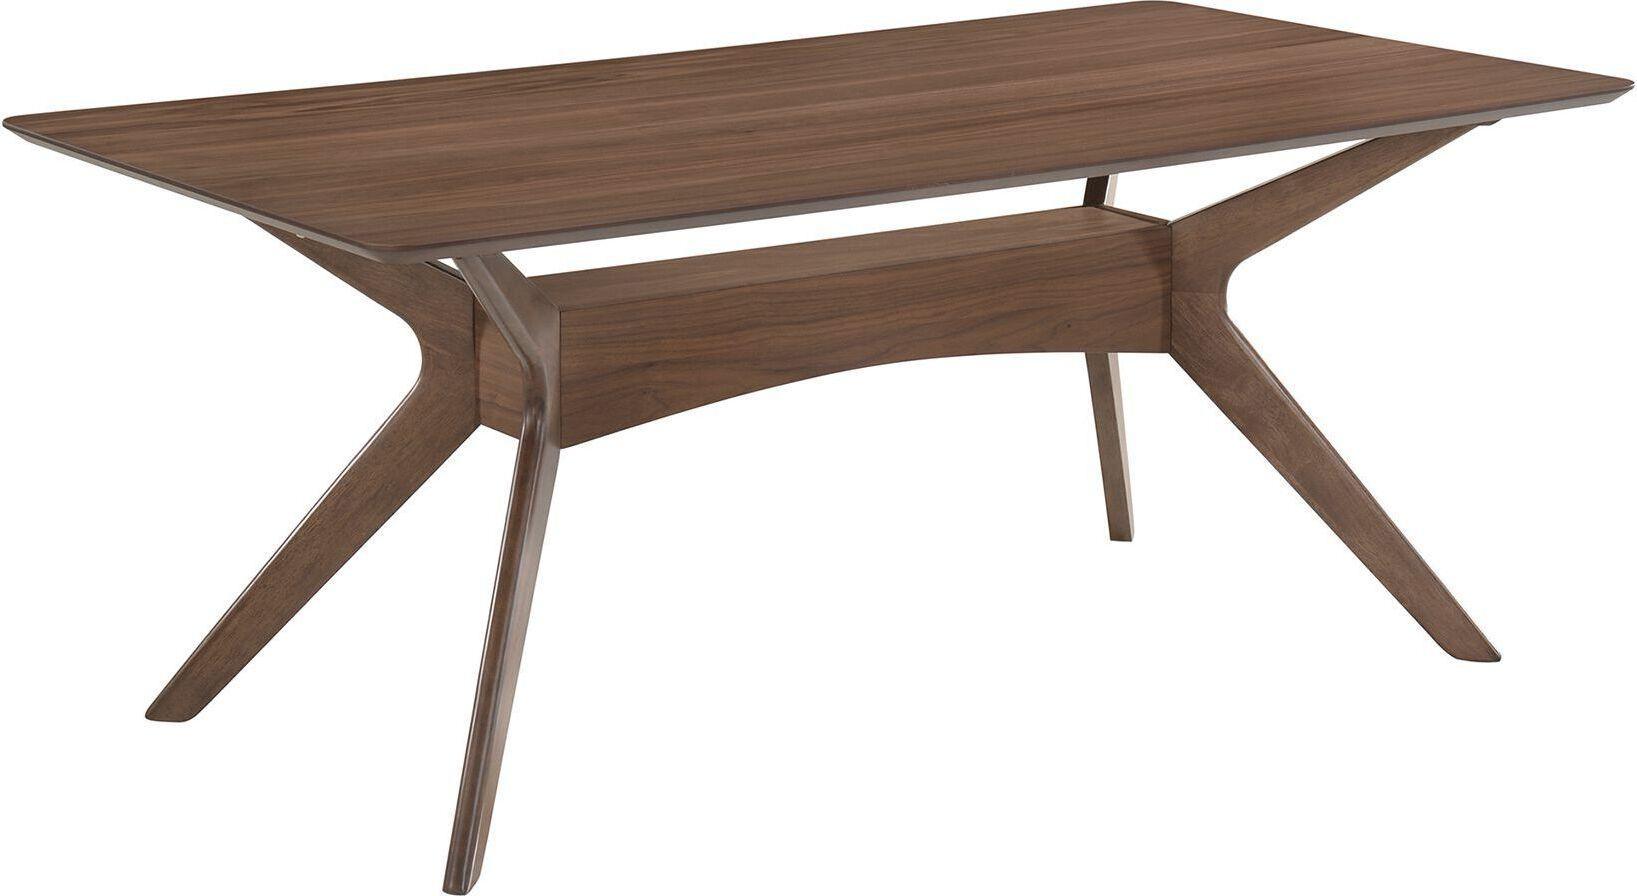 Elements Dining Tables - Ronan Standard Height Rectangle Dining Table